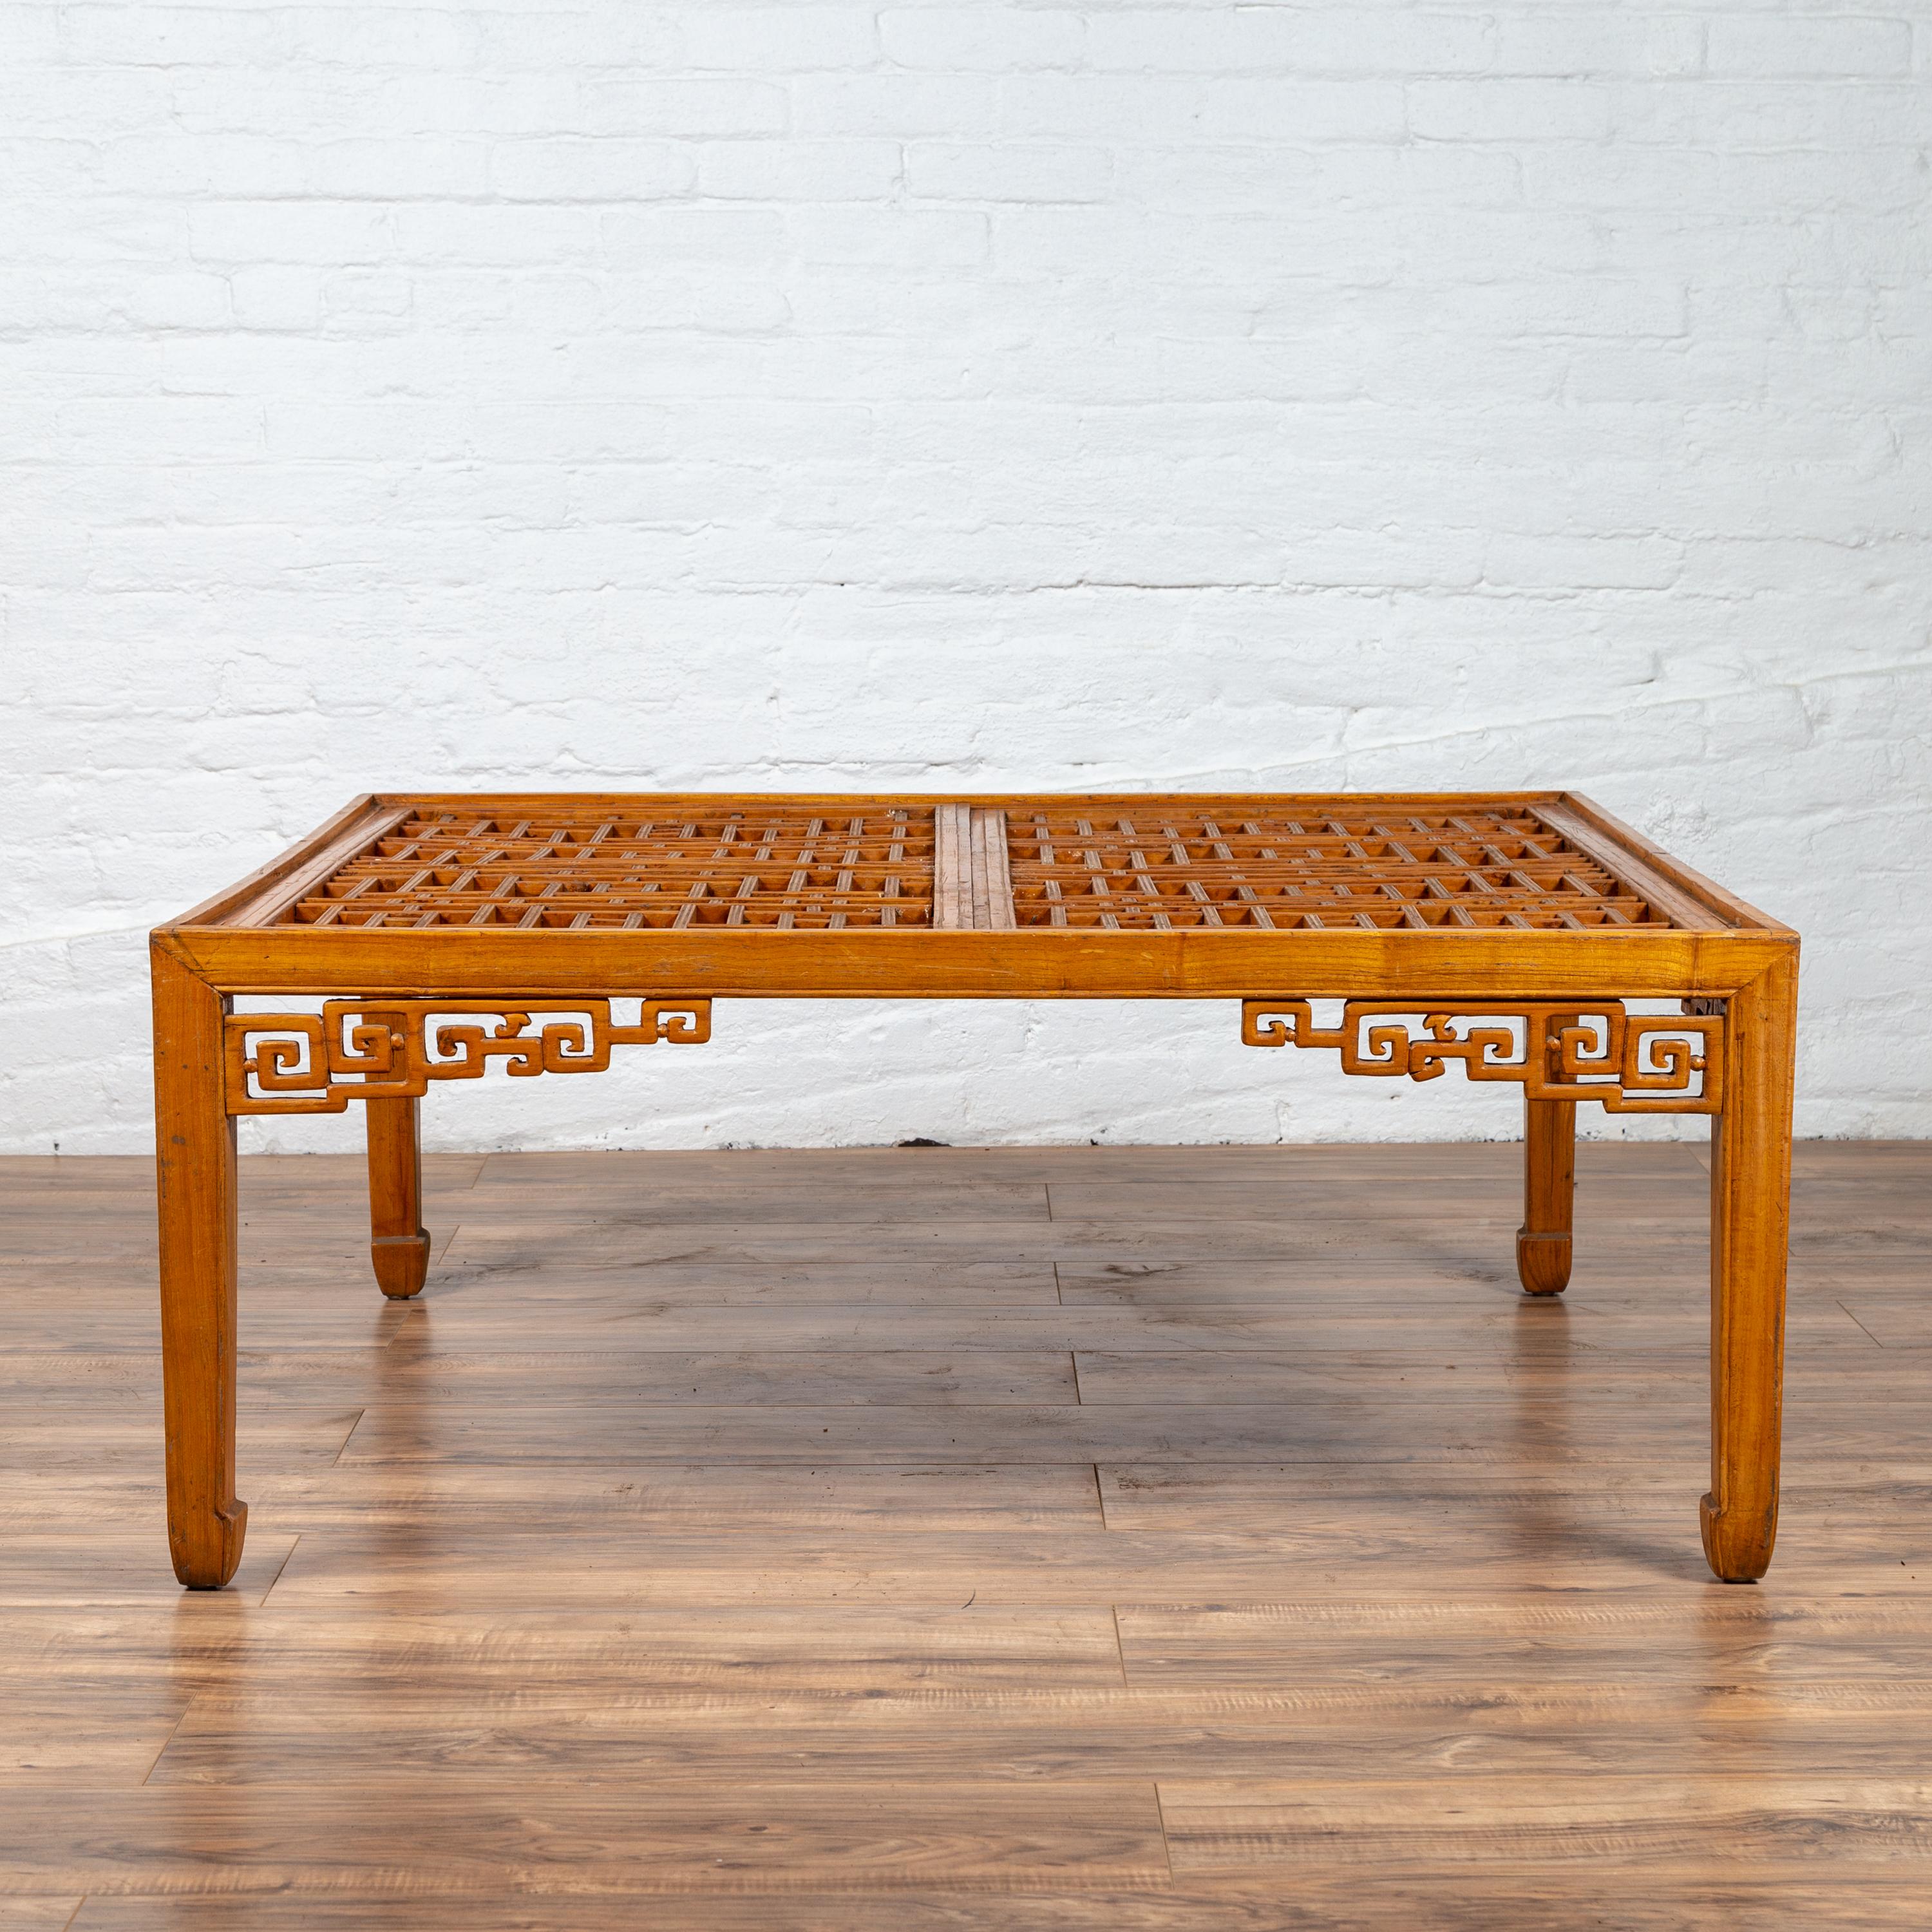 A Chinese elmwood square-shaped coffee table from the late 20th century, with open fretwork design and horse-hoof legs. Born in the later years of the 20th century, this Chinese coffee table features an exquisite rectangular top made of two panels